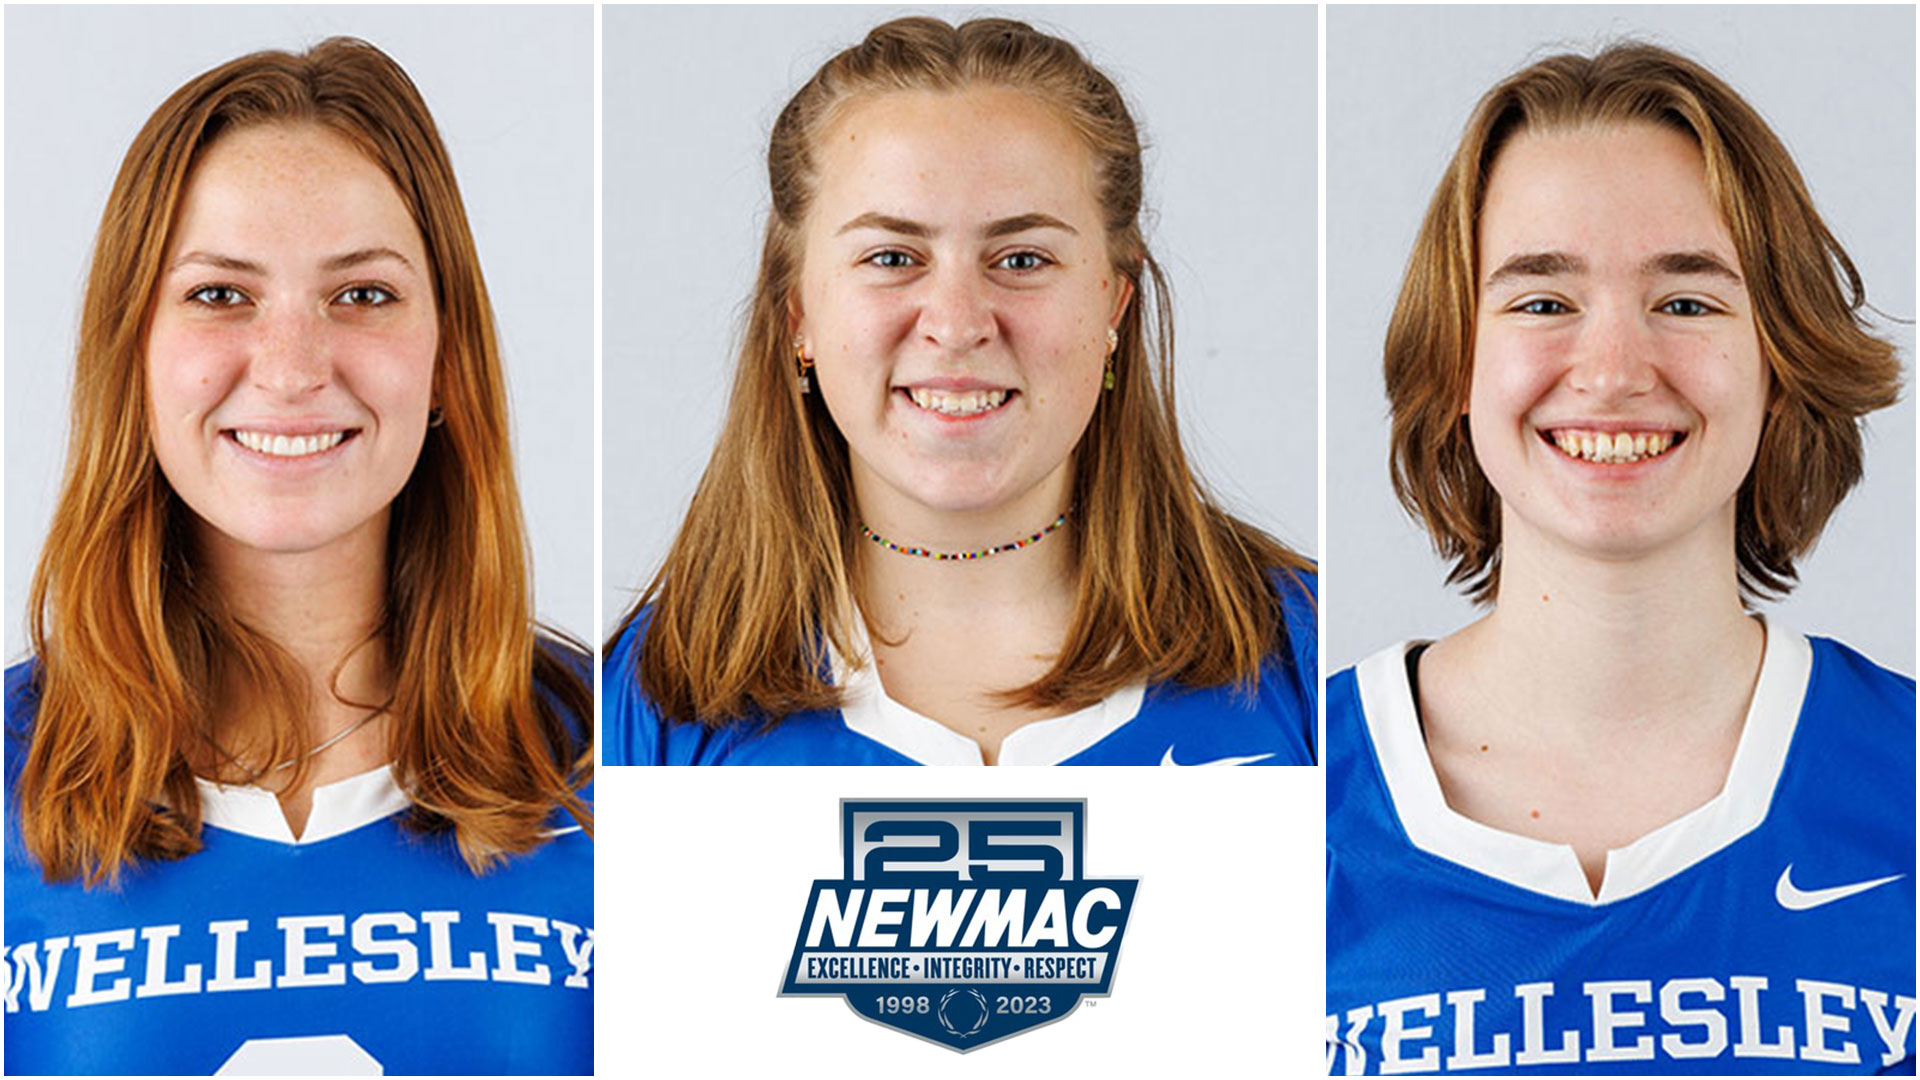 Three members of Wellesley lacrosse earned NEWMAC Academic All-Conference honors.